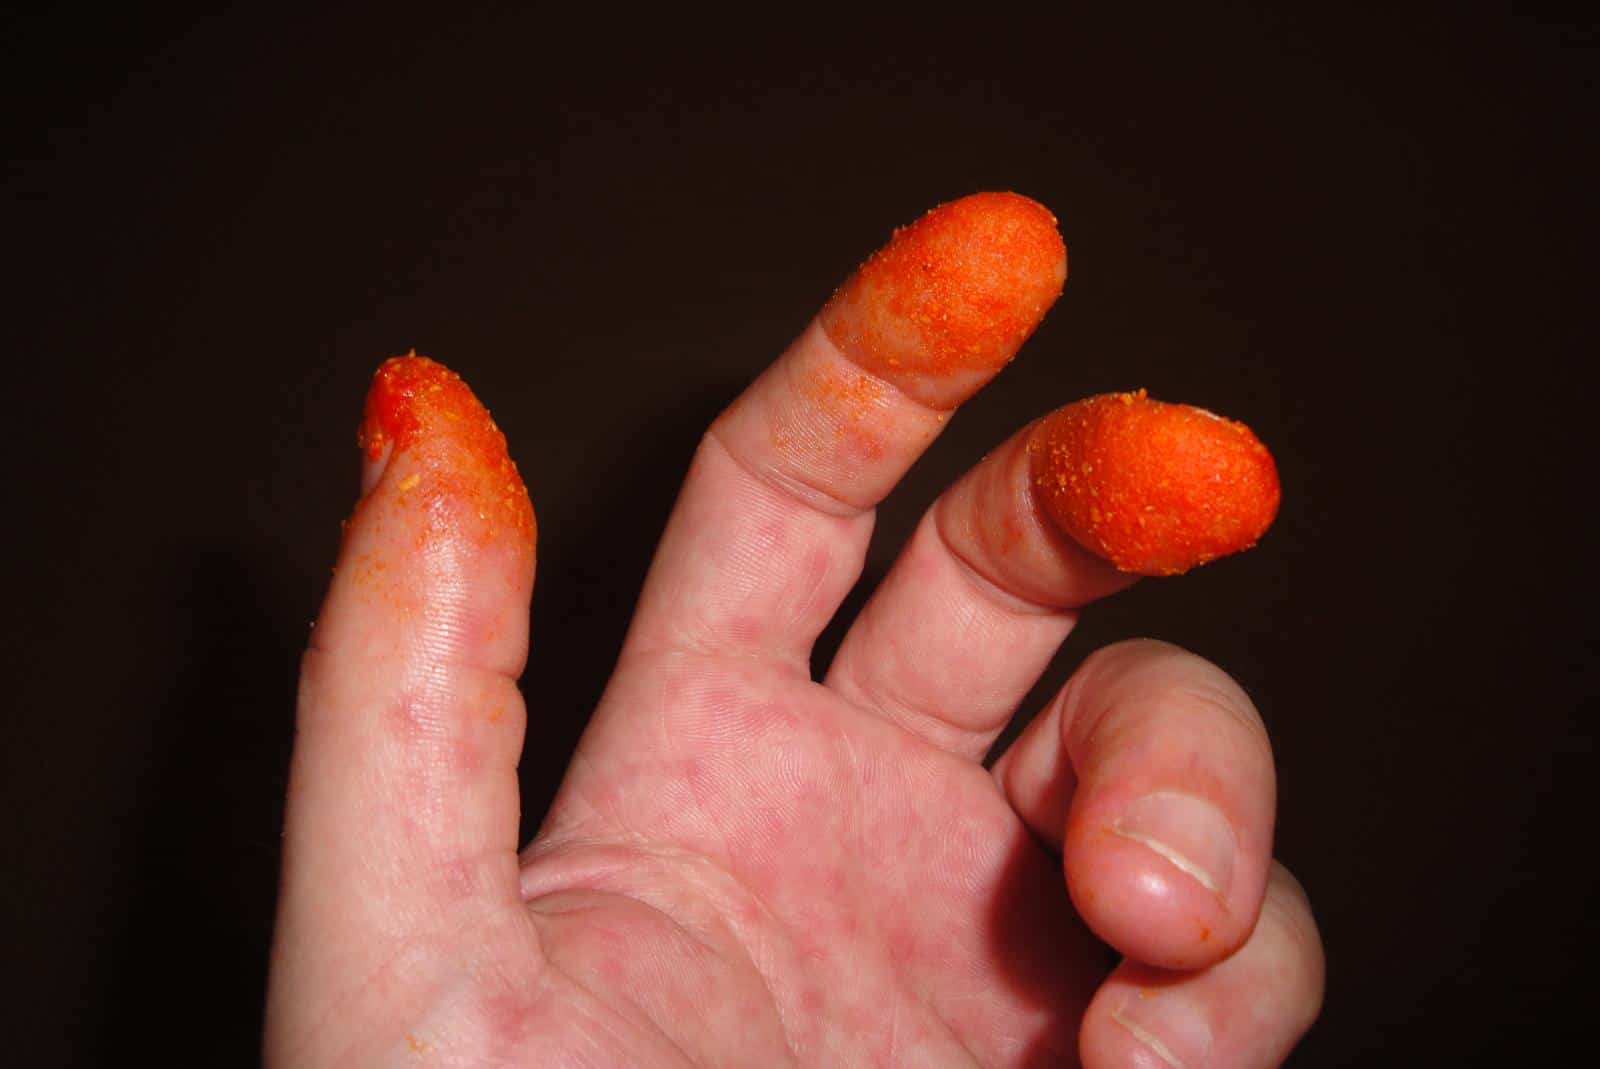 Cheeto Fingers by Chris and_or Kevin at Flickr